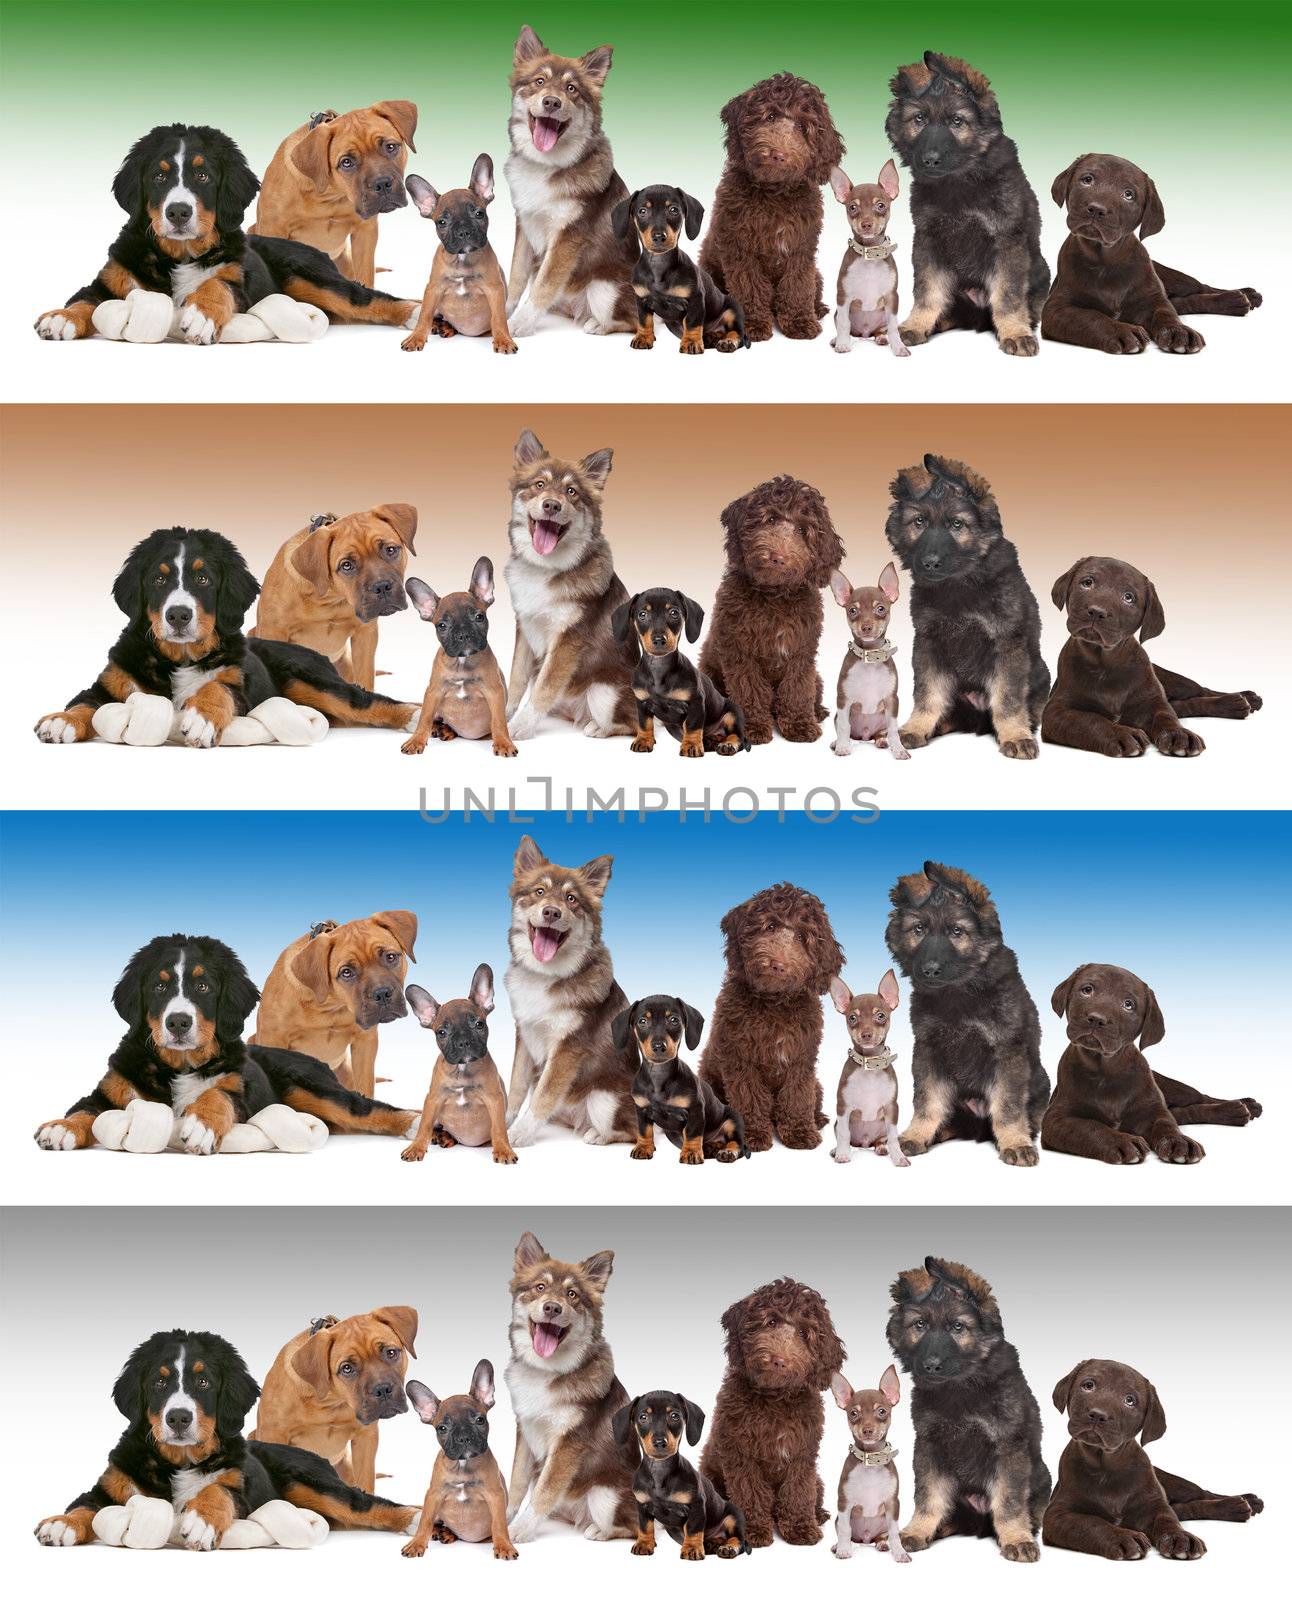 Large group of puppies in front of diverse gradient backgrounds